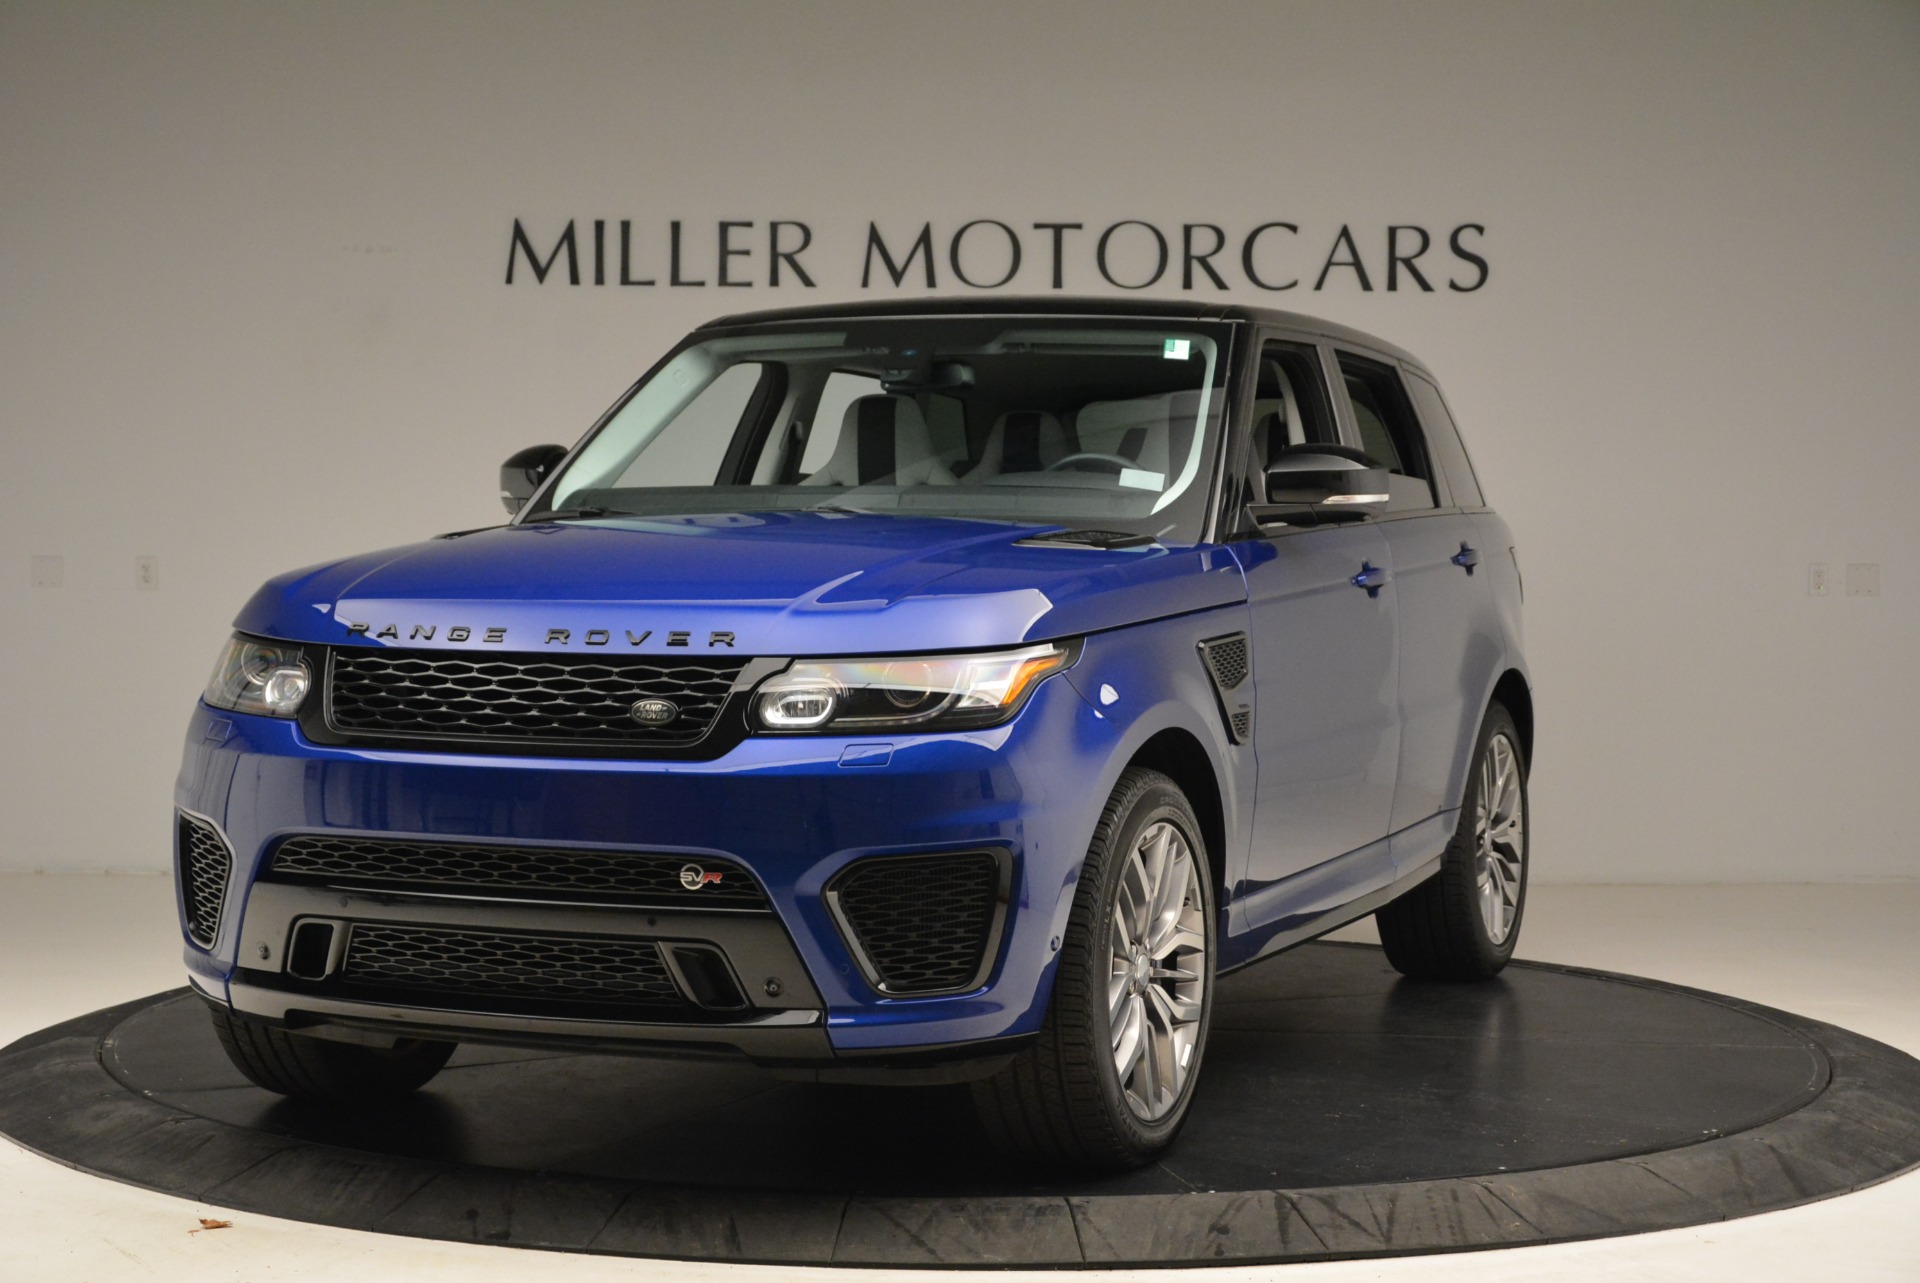 Used 2015 Land Rover Range Rover Sport SVR for sale Sold at Rolls-Royce Motor Cars Greenwich in Greenwich CT 06830 1